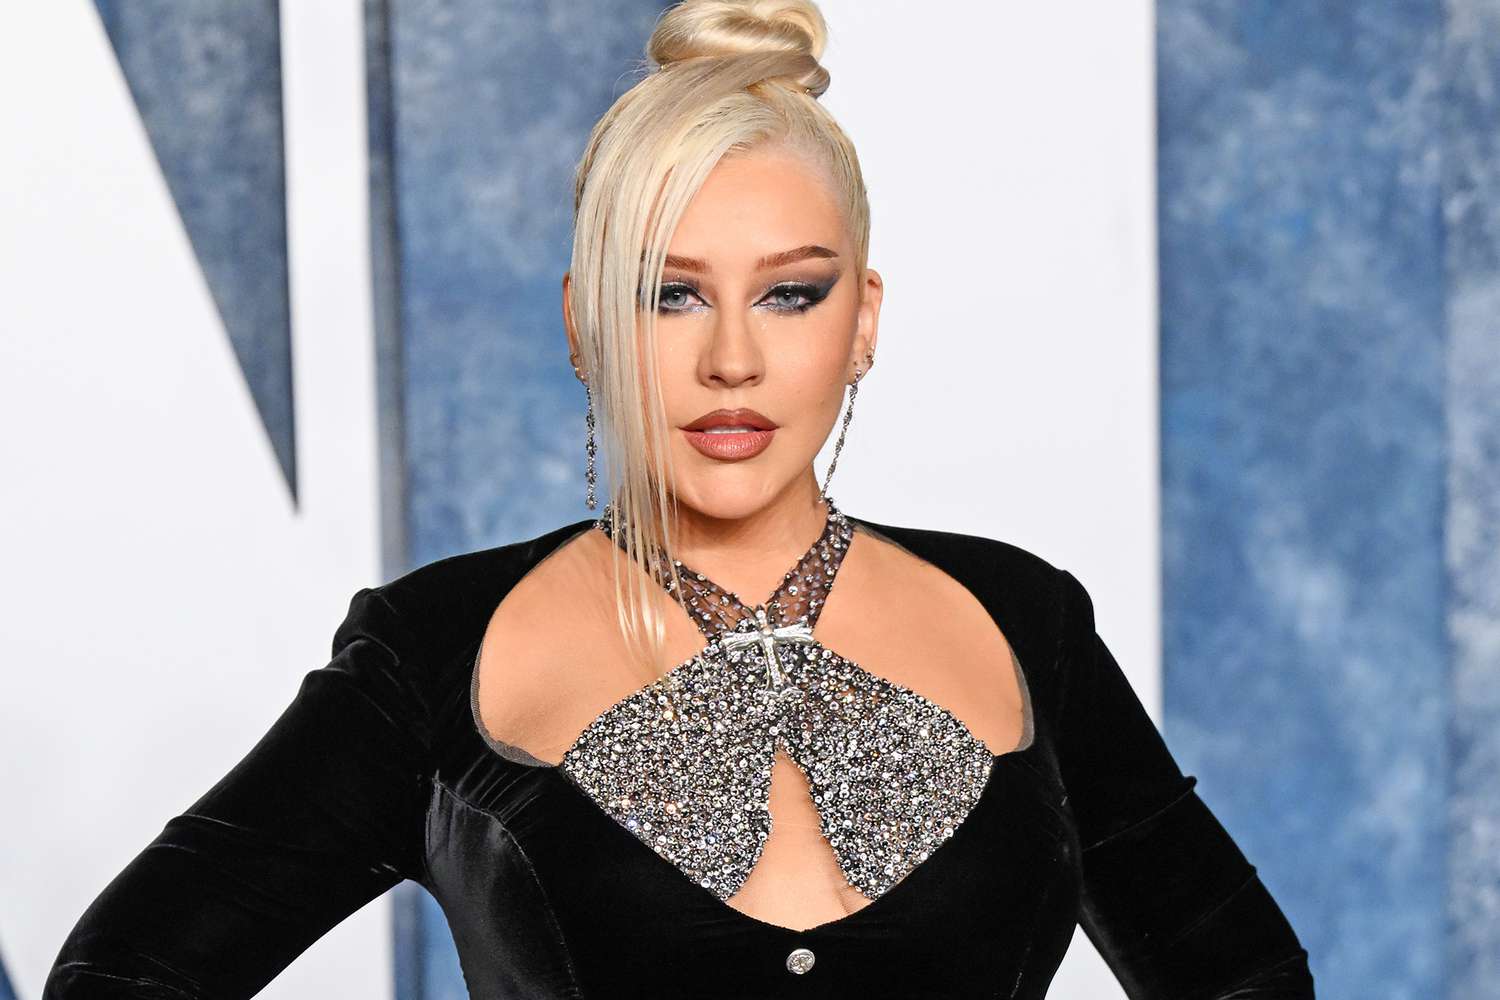 BEVERLY HILLS, CALIFORNIA - MARCH 12: Christina Aguilera attends the 2023 Vanity Fair Oscar Party hosted by Radhika Jones at Wallis Annenberg Center for the Performing Arts on March 12, 2023 in Beverly Hills, California. (Photo by Karwai Tang/WireImage)